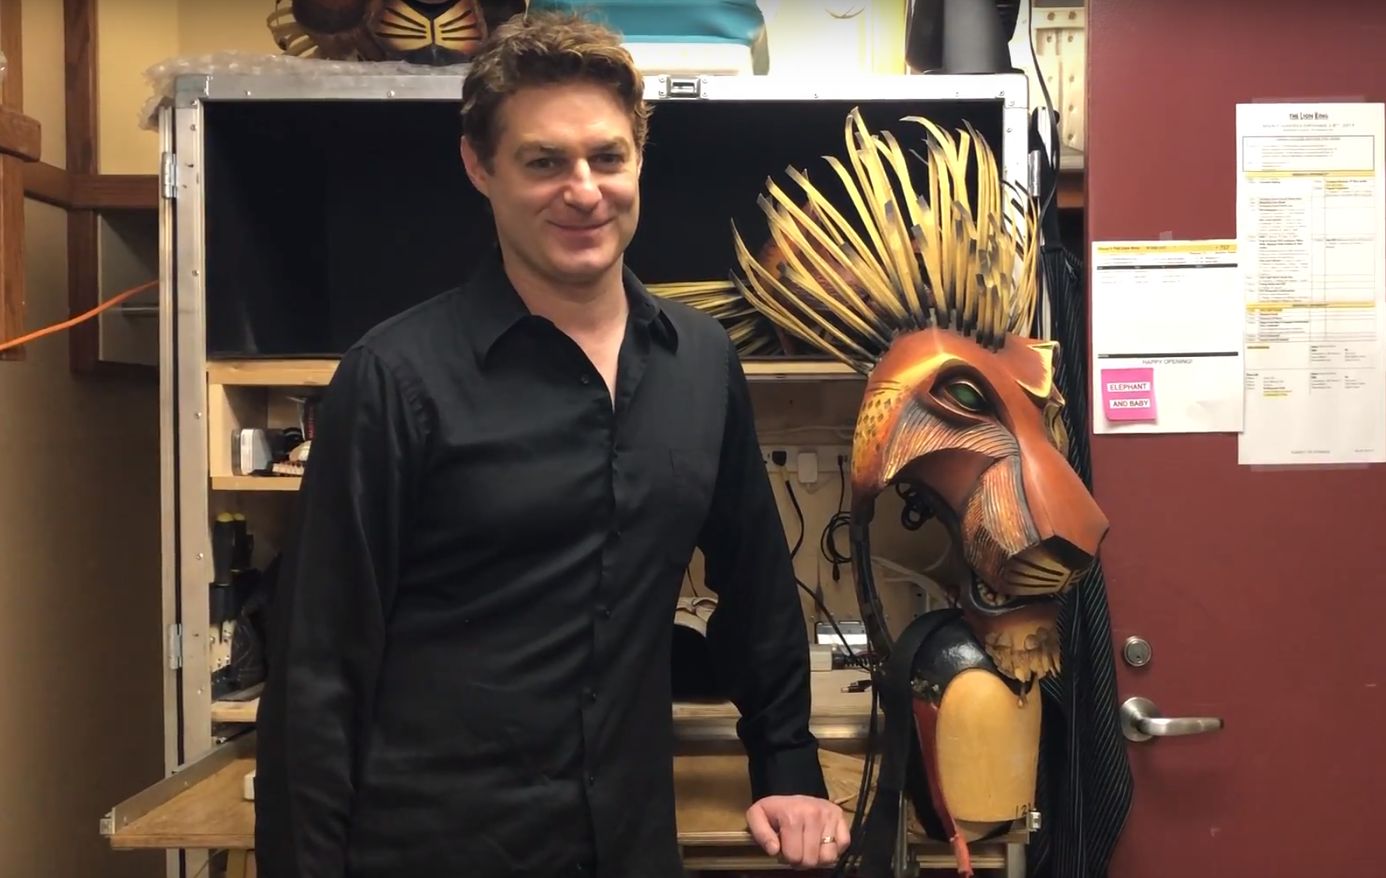 Spencer Plachy backstage at Disney's The Lion King